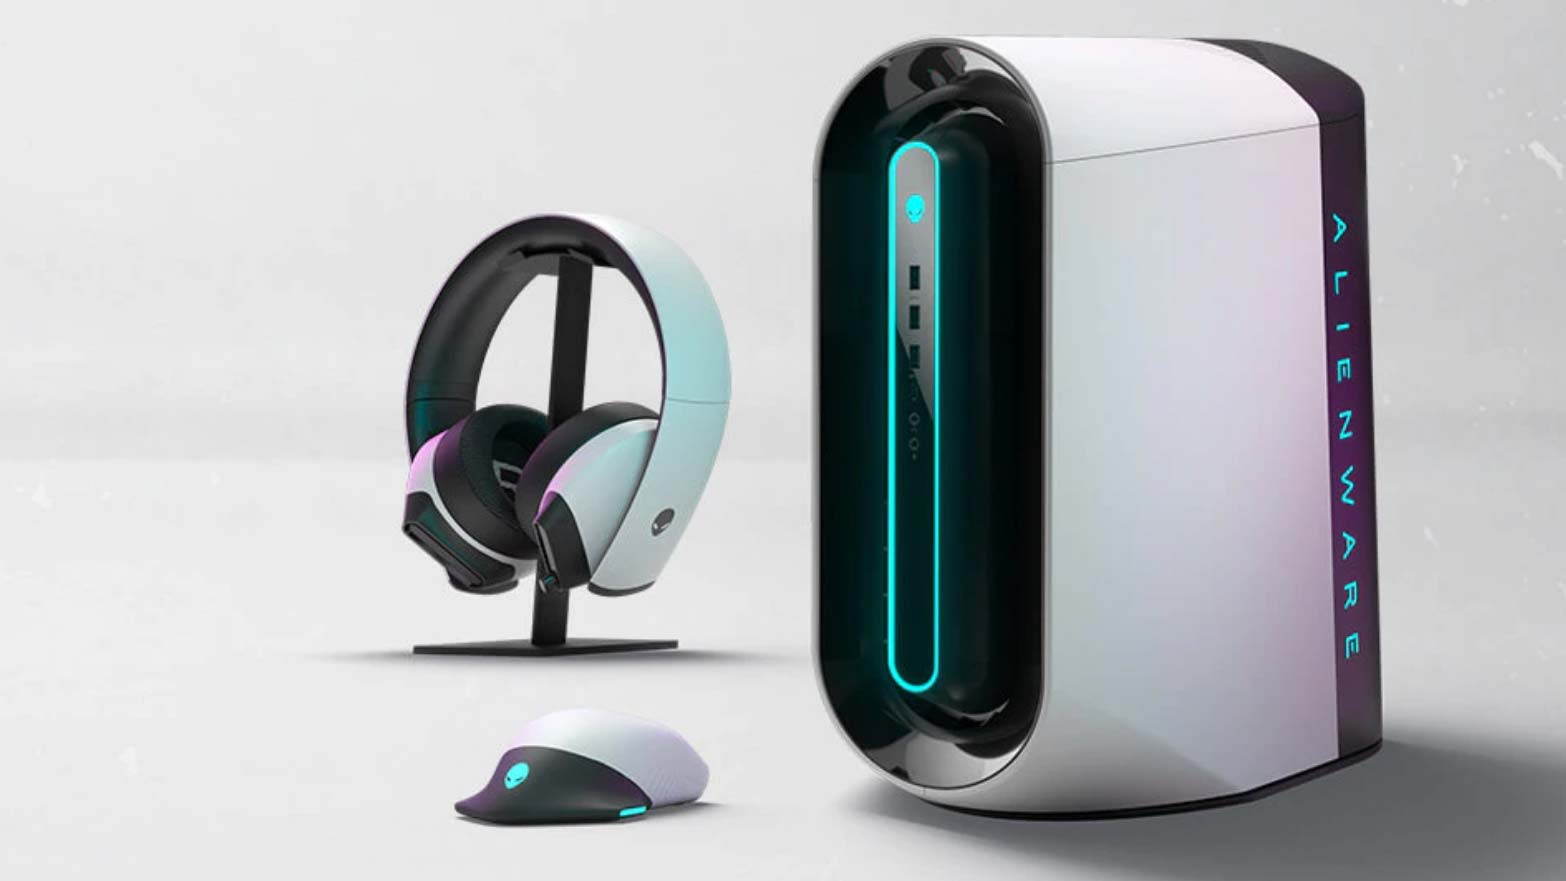  The Alienware Aurora is the Most Powerful Gaming Desktop with Added AI Capabilities